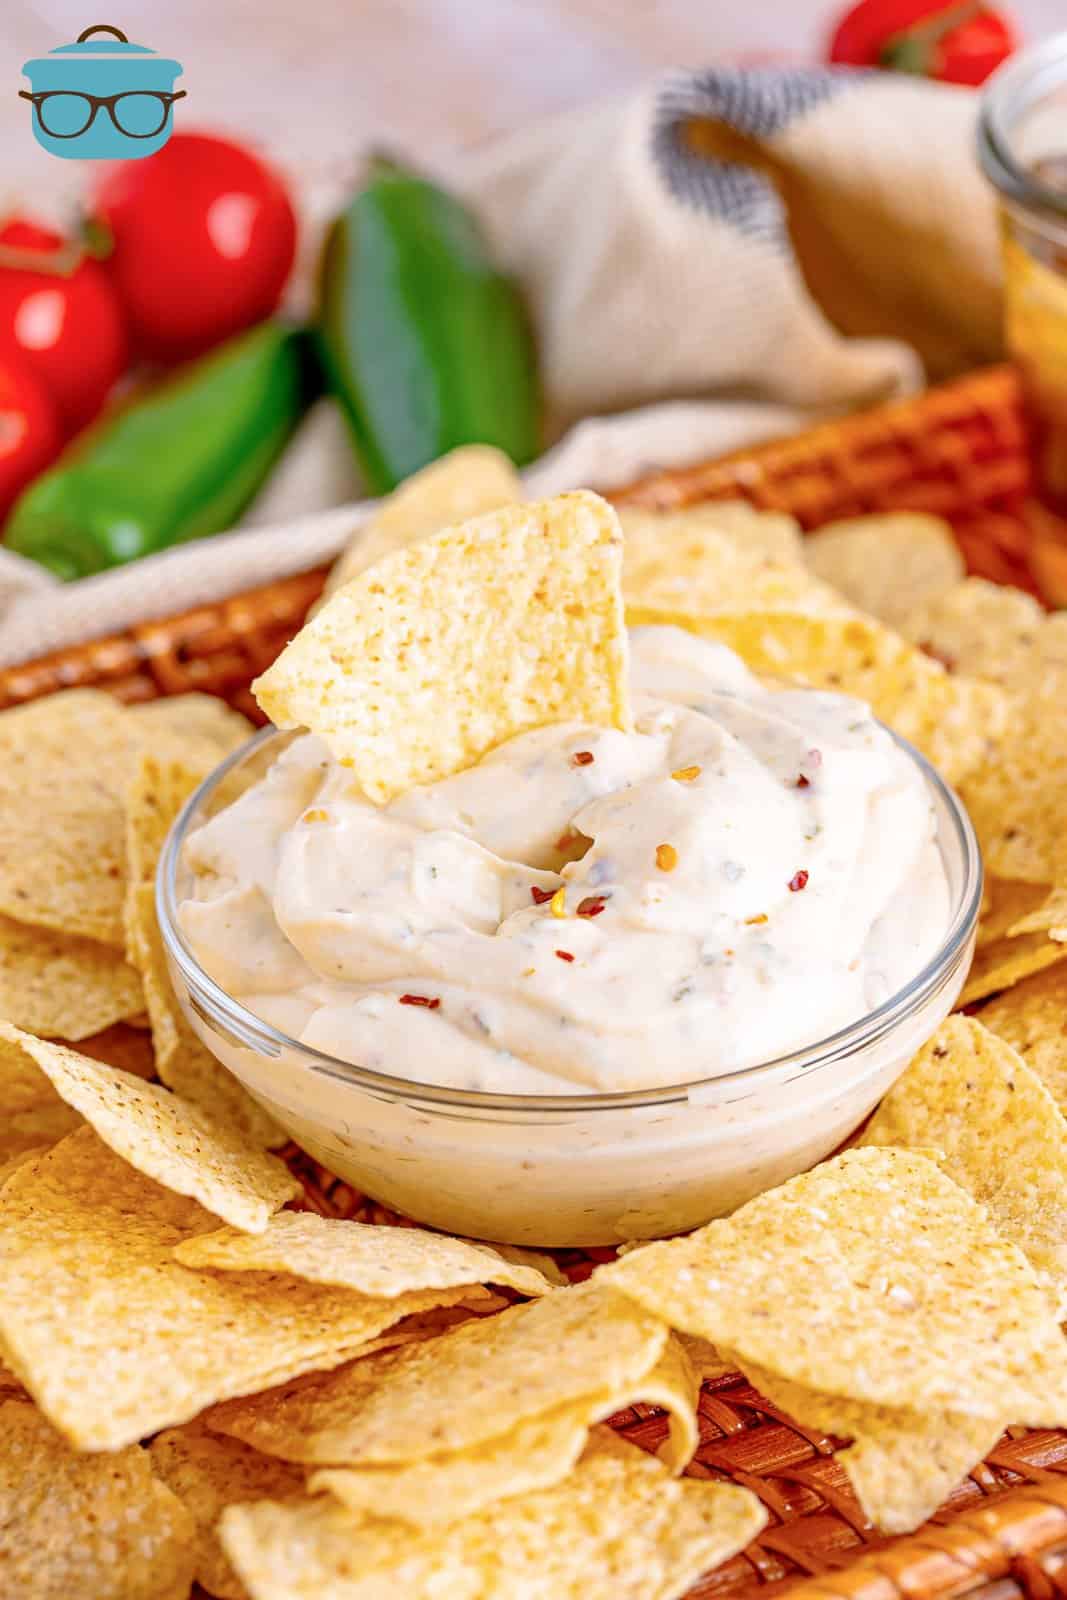 a tortilla chip shown dipped into the white sauce in a clear glass bowl.